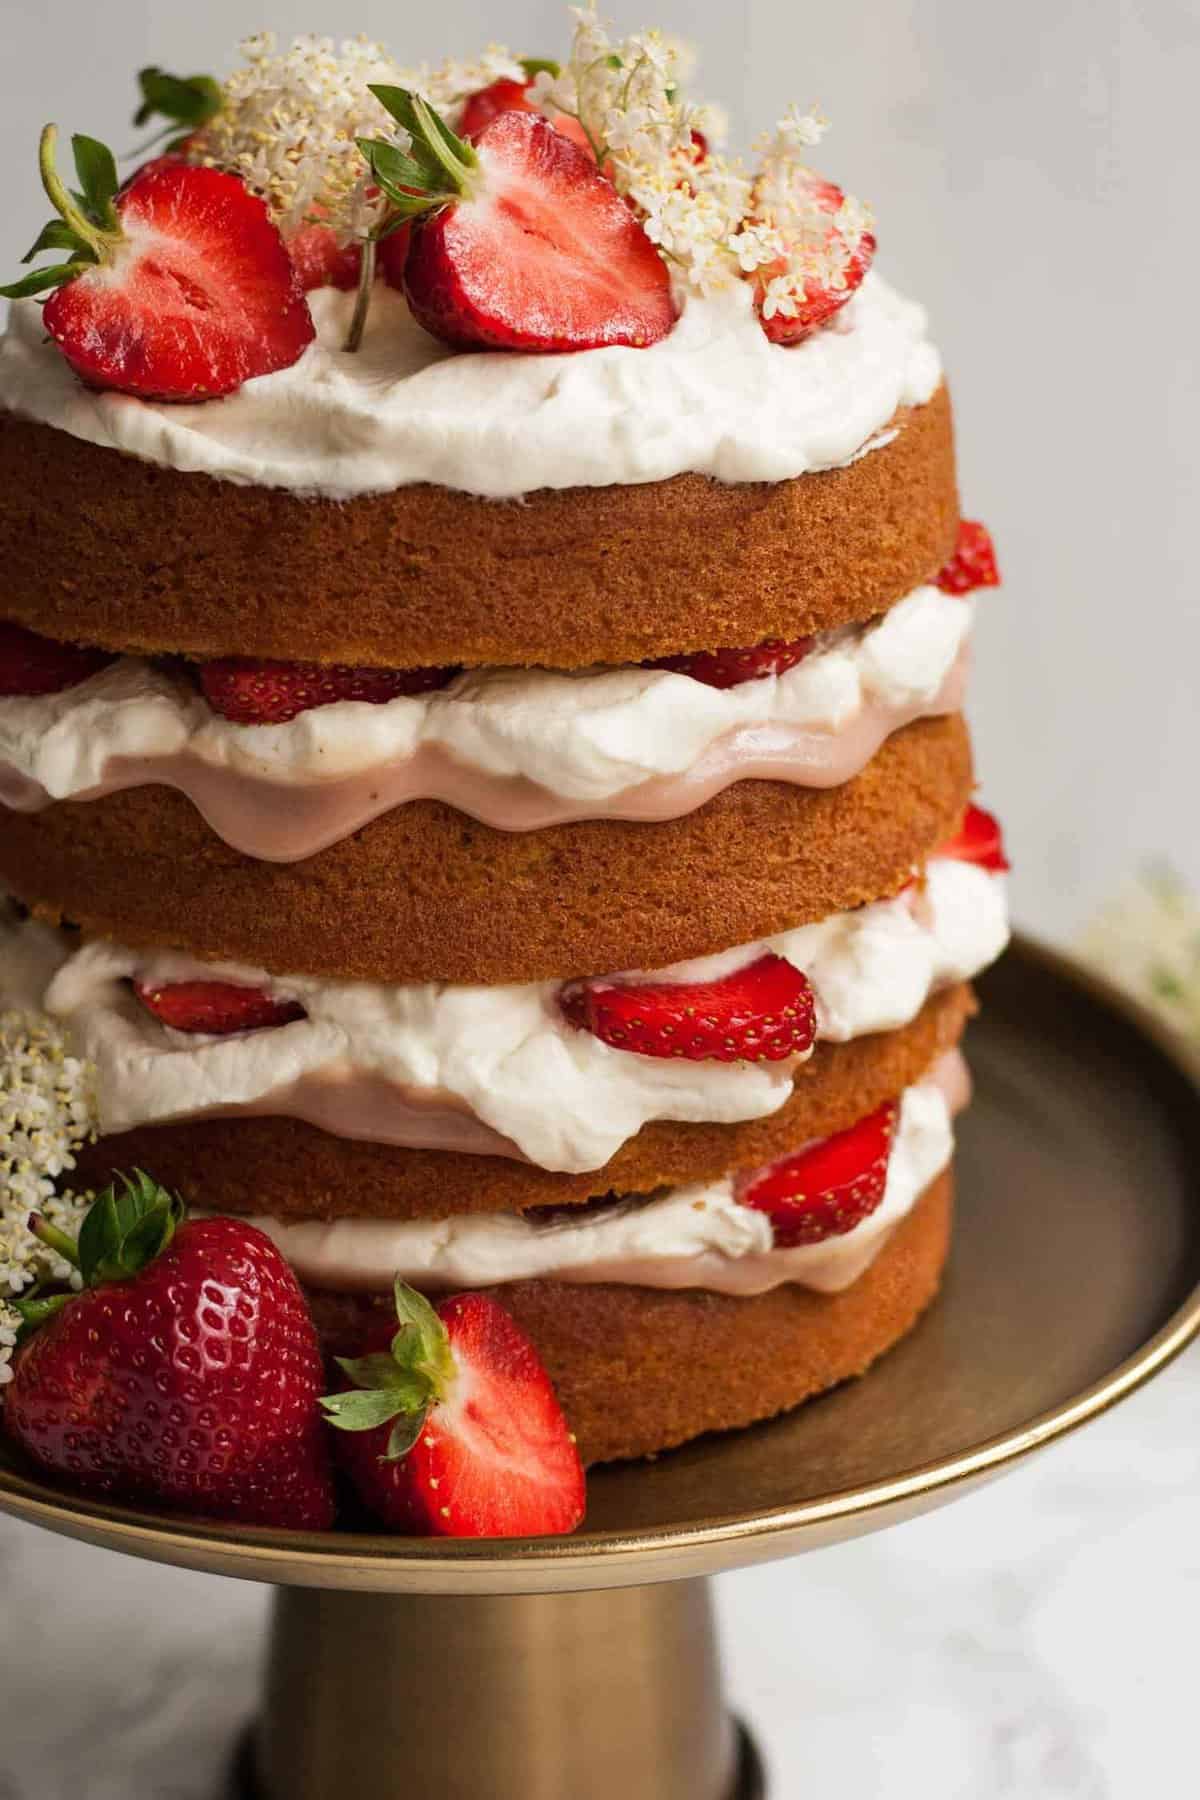 A side on of cake on a cake showing the layers with cream, curd and strawberries.